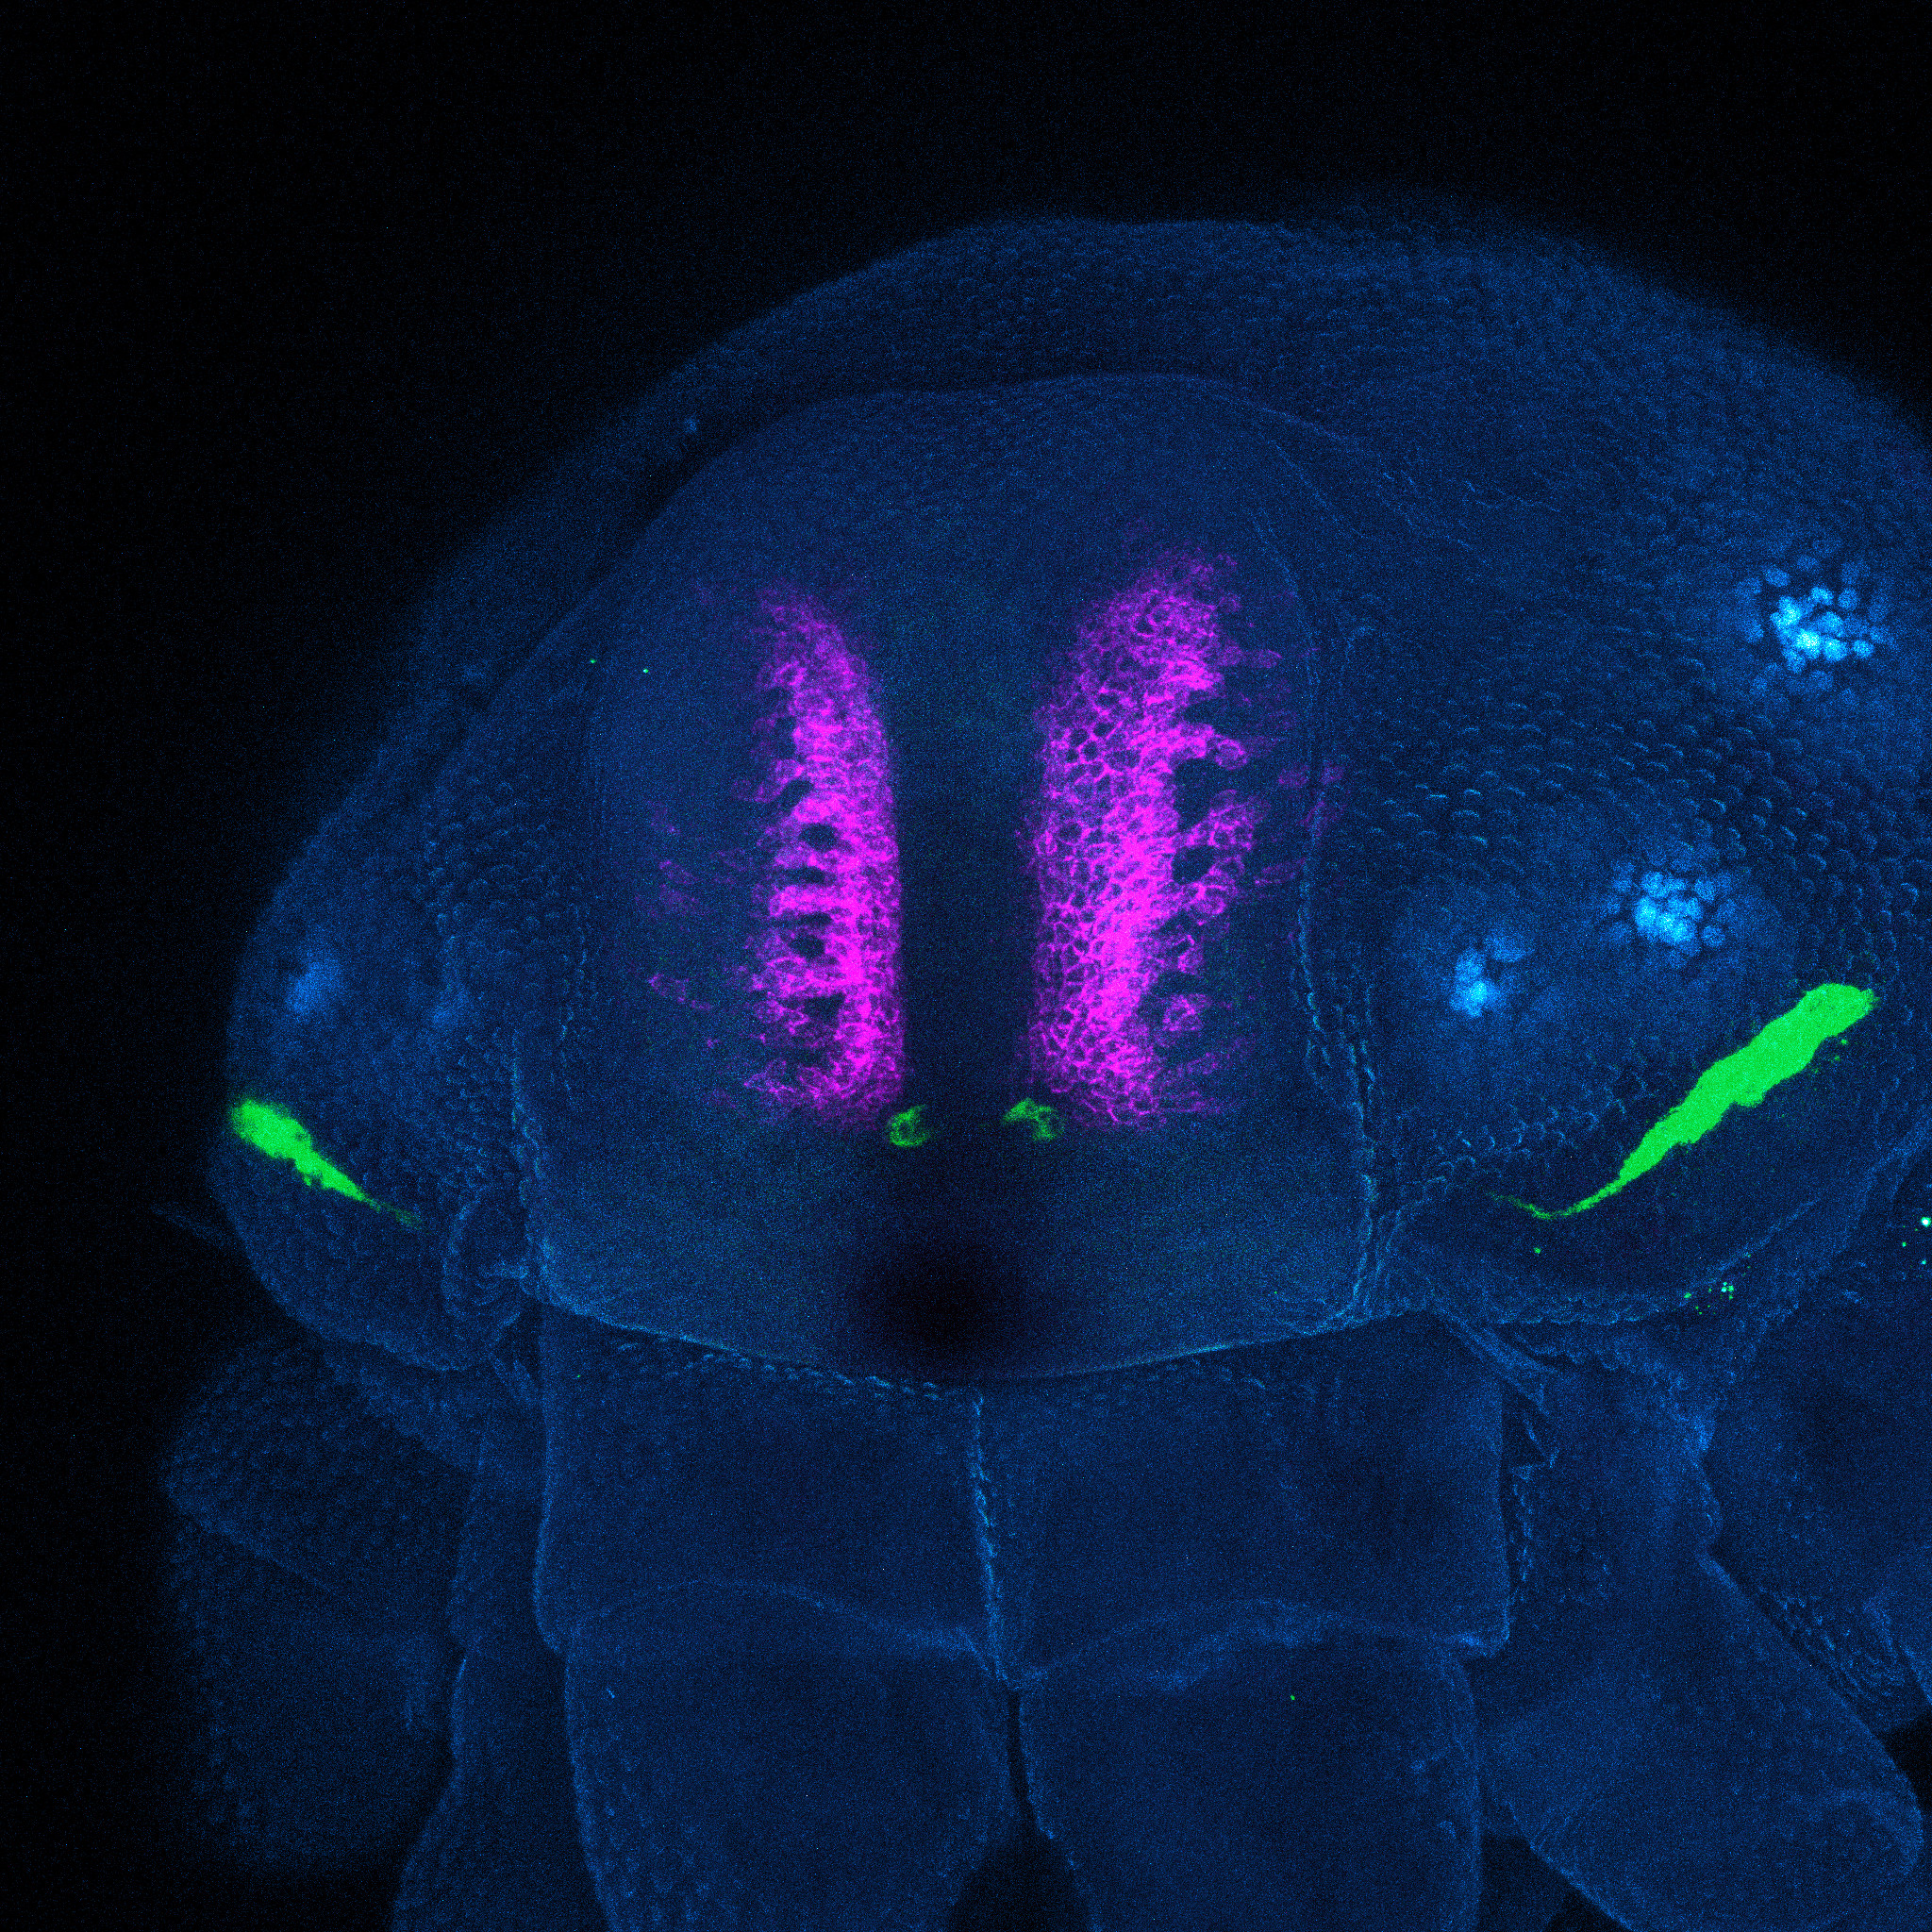 The head of a daddy longlegs under a microscope. Patches of glowing magenta and green illuminate its head.